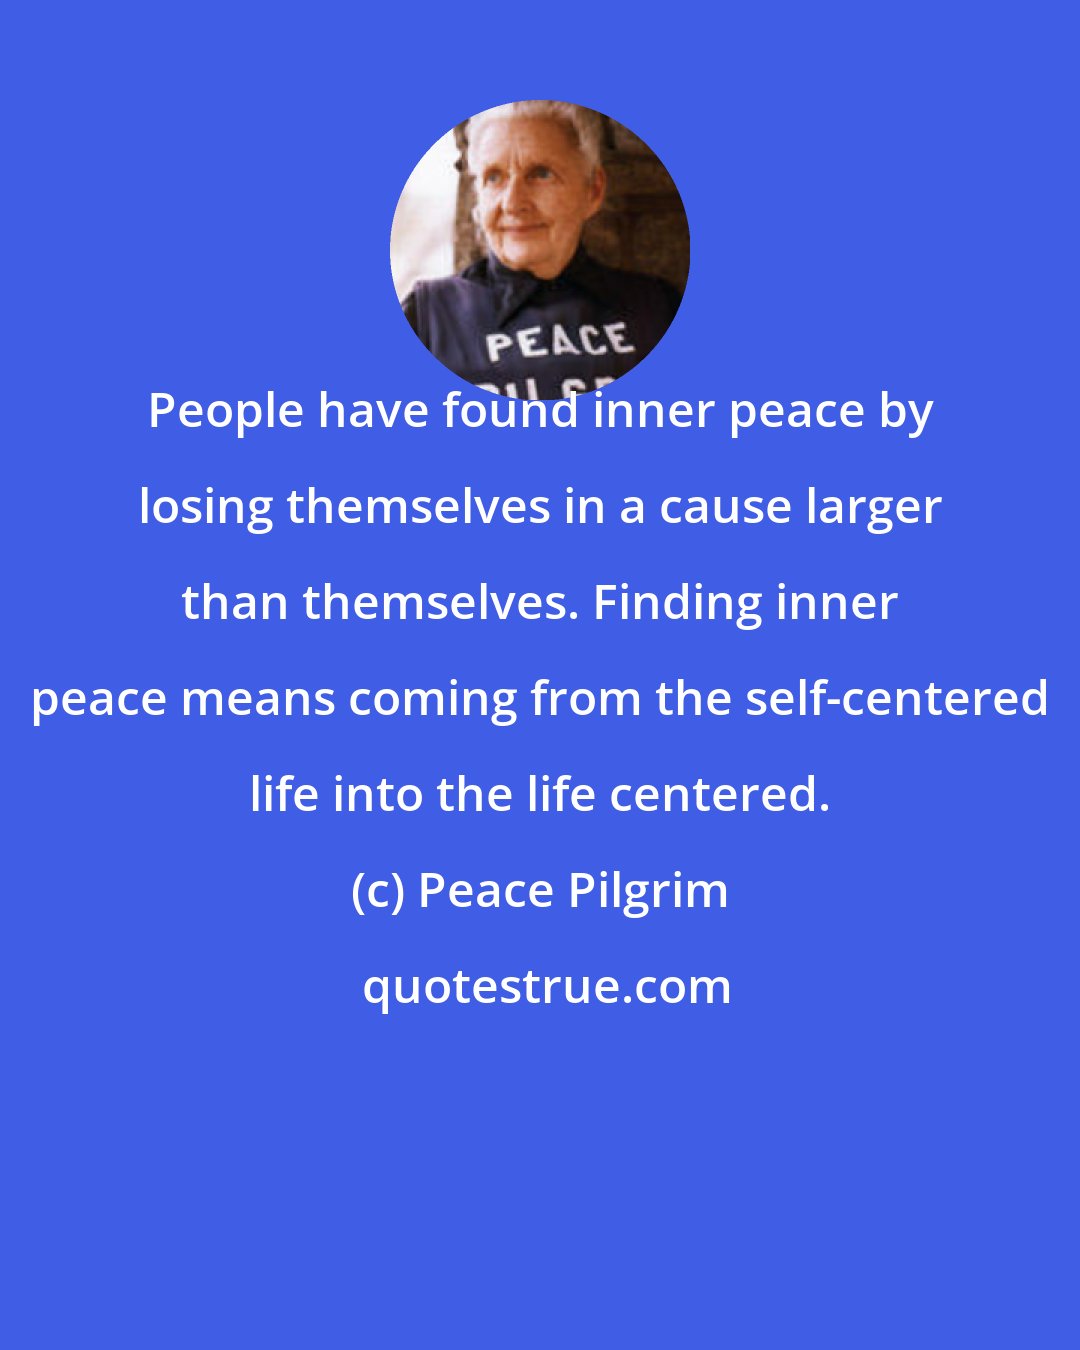 Peace Pilgrim: People have found inner peace by losing themselves in a cause larger than themselves. Finding inner peace means coming from the self-centered life into the life centered.